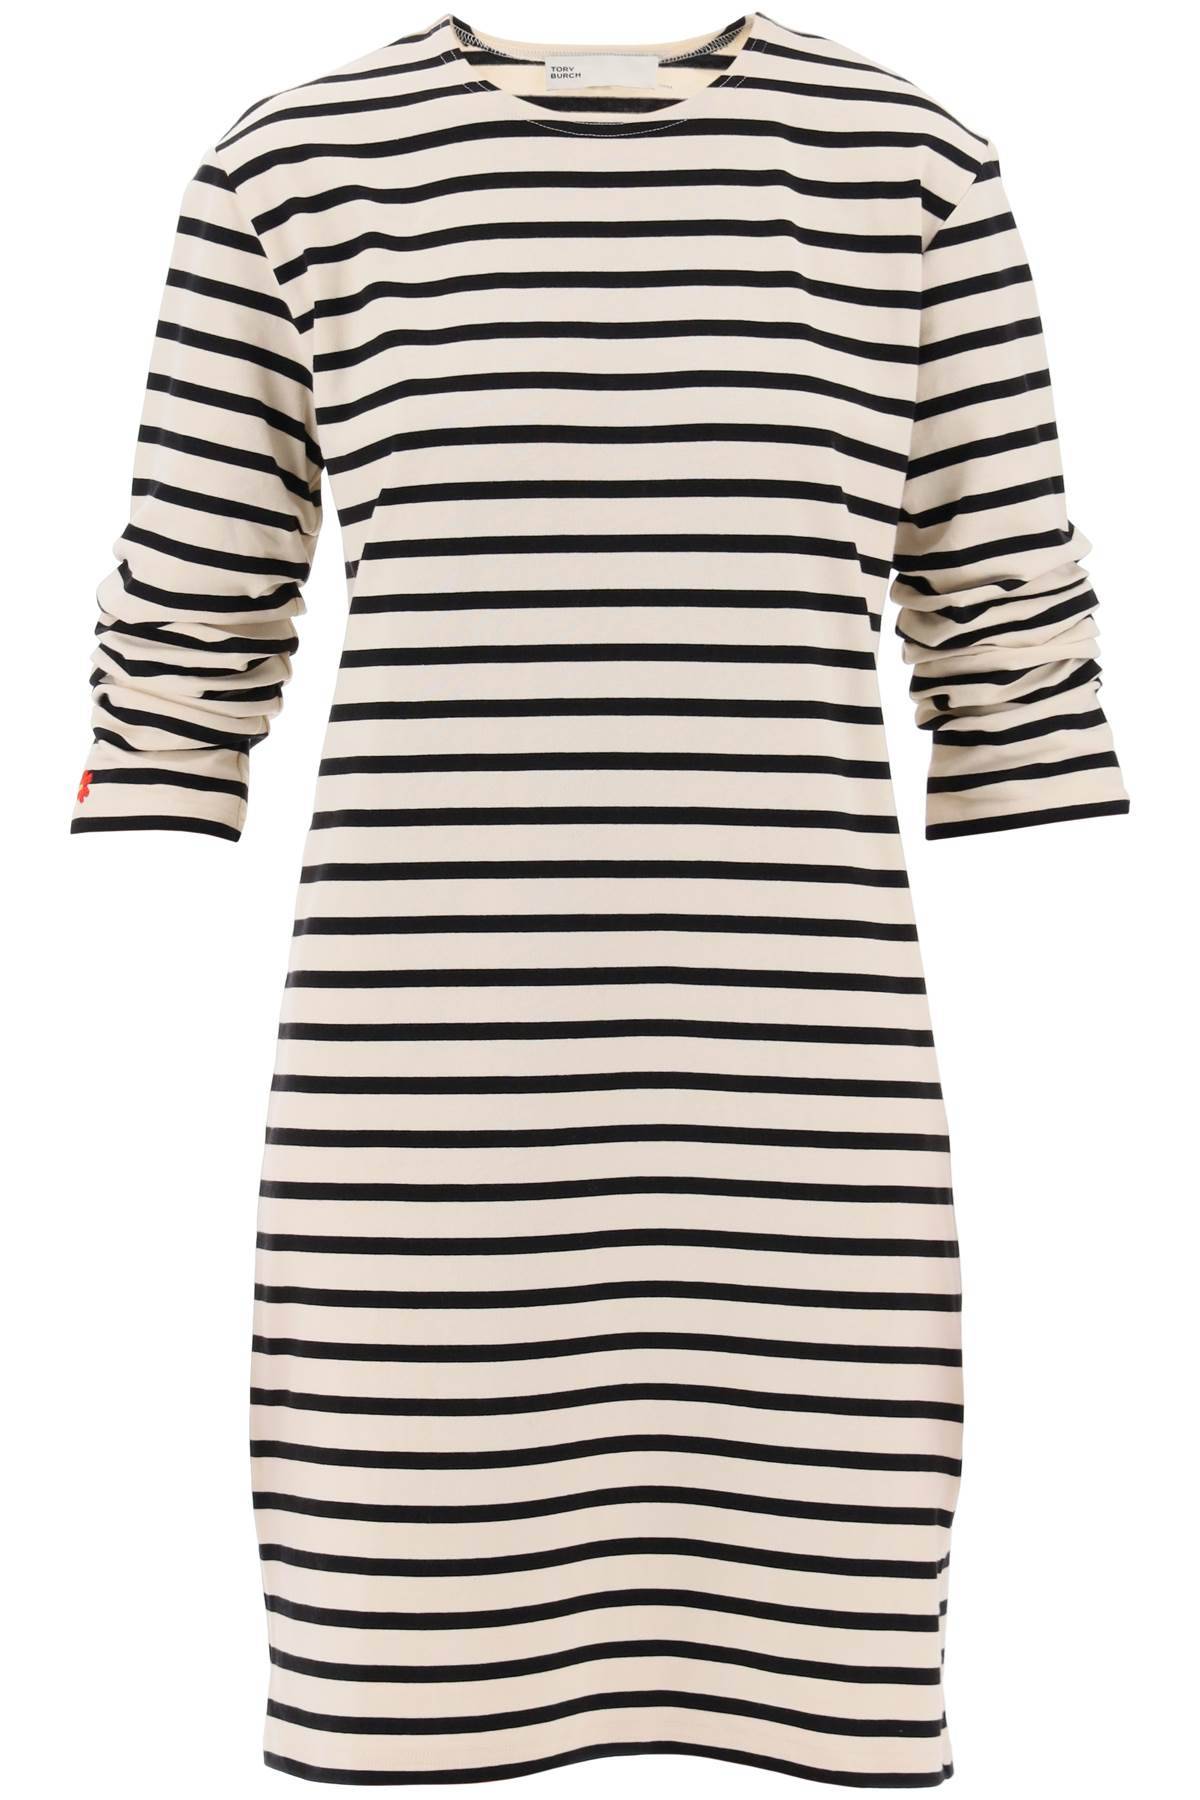 Tory Burch TORY BURCH "striped cotton dress with eight